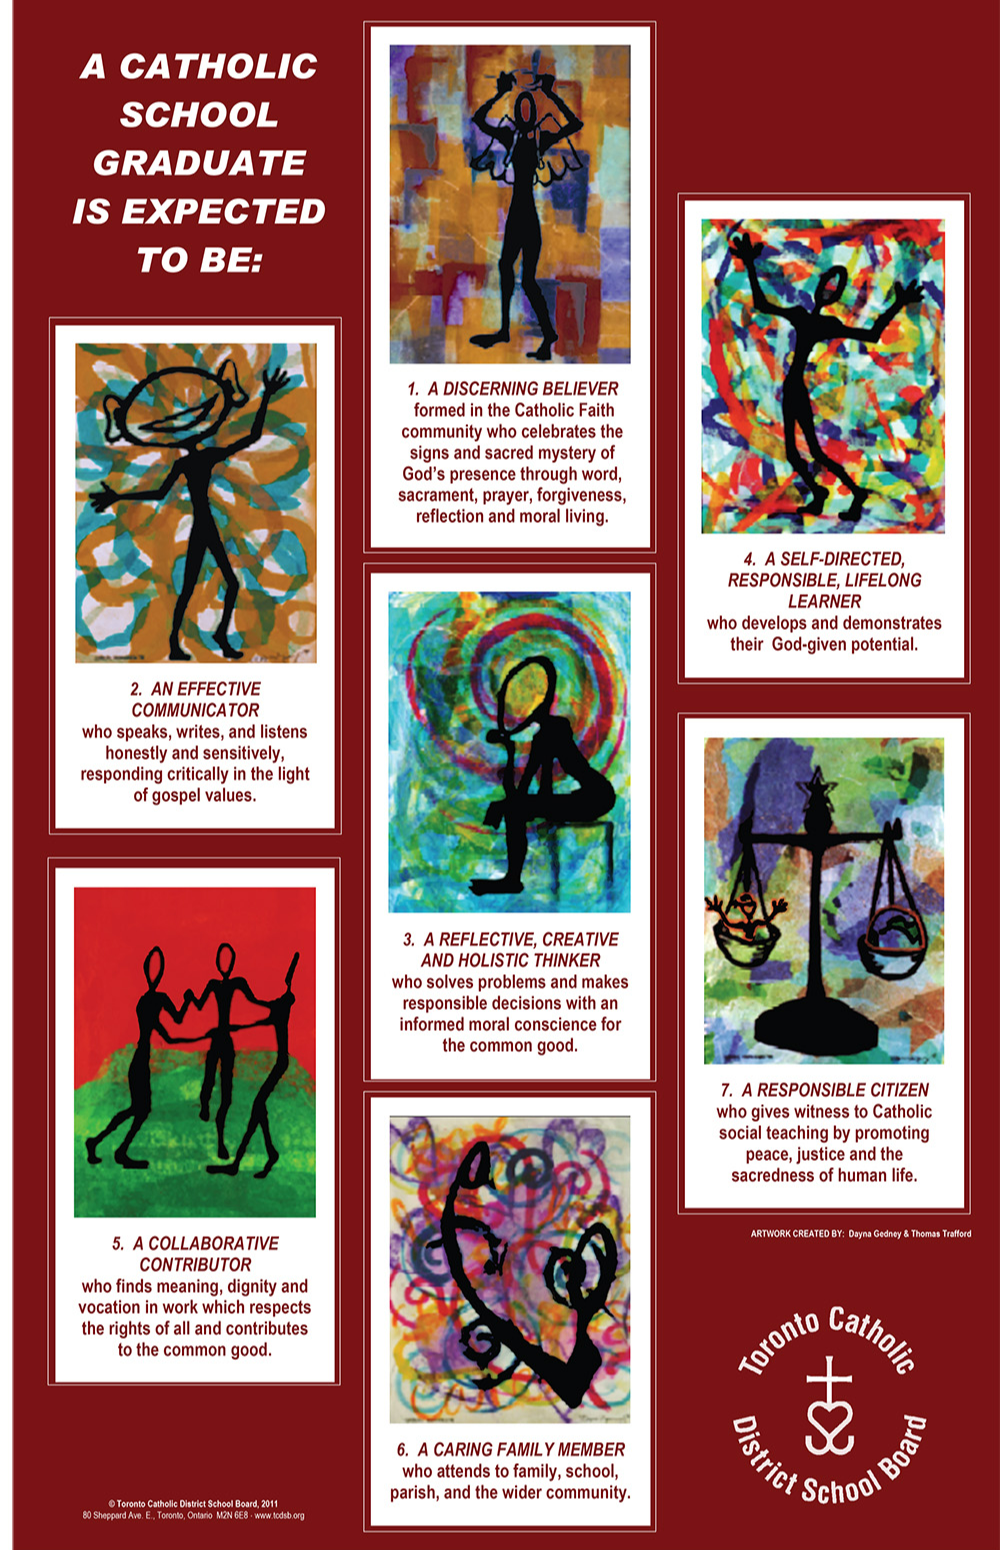 Catholic School Graduate Expections poster.  A Catholic School Graduate is expected to be:  A discerning believer formed in the Catholic faith community who celebrates the signs and sacred mysteries of God’s presence through word, sacrament, prayer, forgiveness, reflection and moral living.  An effective communicator who speaks, writes and listens honestly and sensitively, responding critically in light of gospel values.  A reflective, creative and holistic thinker who solves problems and makes responsible decisions with an informed moral conscience for the common good.  A self-directed, responsible, life-long learner who develops and demonstrates their God-given potential.  A collaborative contributor who finds meaning, dignity and vocation in work which respects the rights of all and contributes to the common good.  A caring family member who attends to family, school, parish, and the wider community.  A responsible citizen who gives witness to Catholic social teaching by promoting peace, justice and the sacredness of human life.